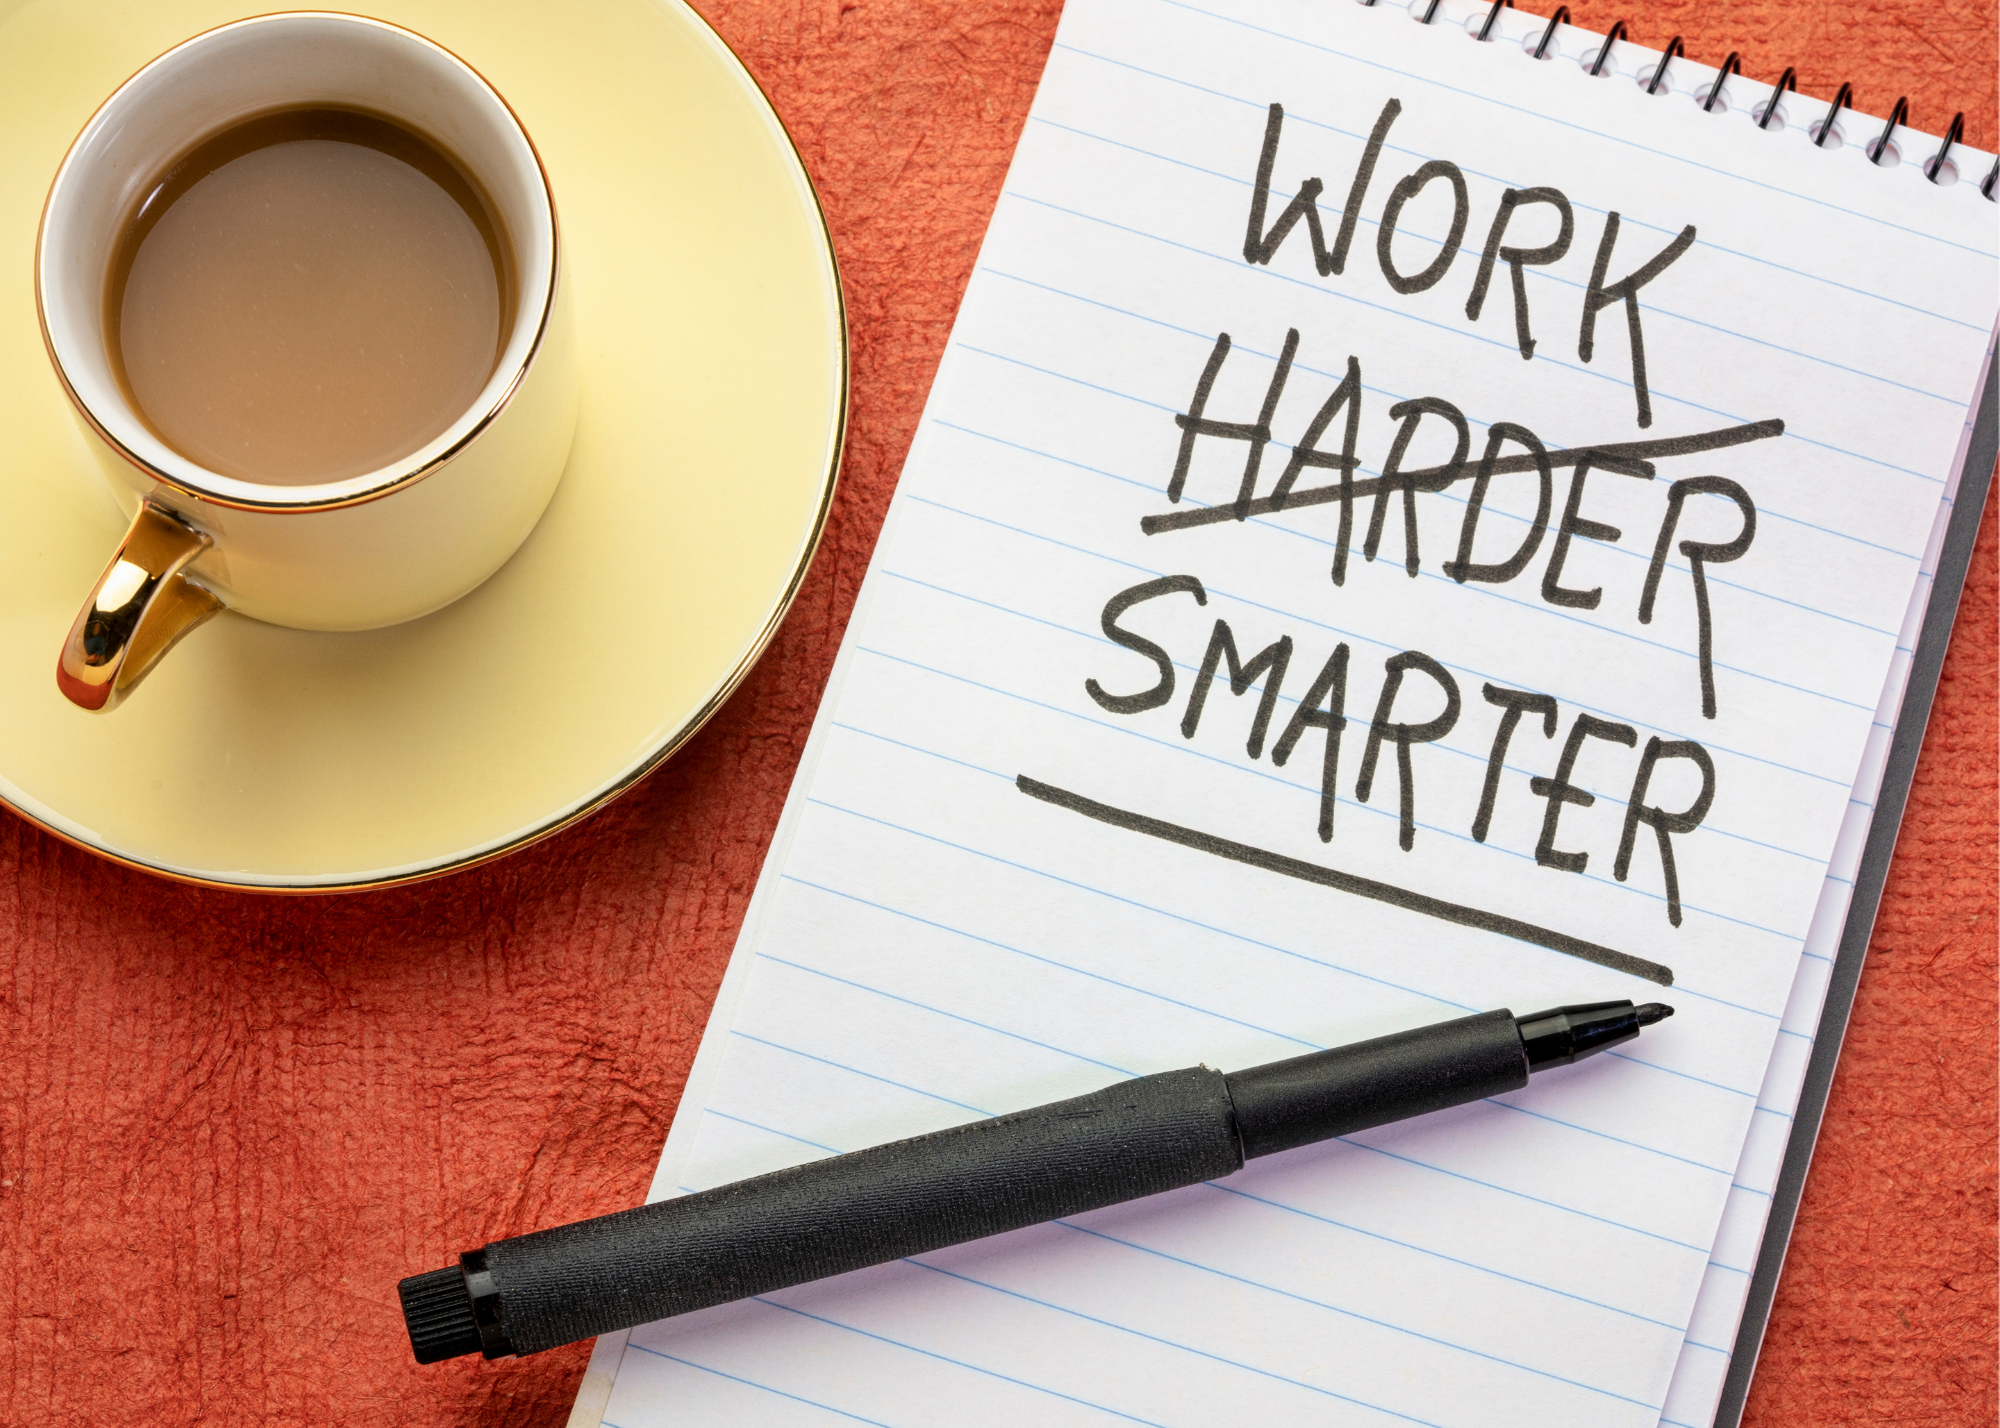 Work Smarter, Not Harder: How to Leverage Technology to Make your Work Life Easier